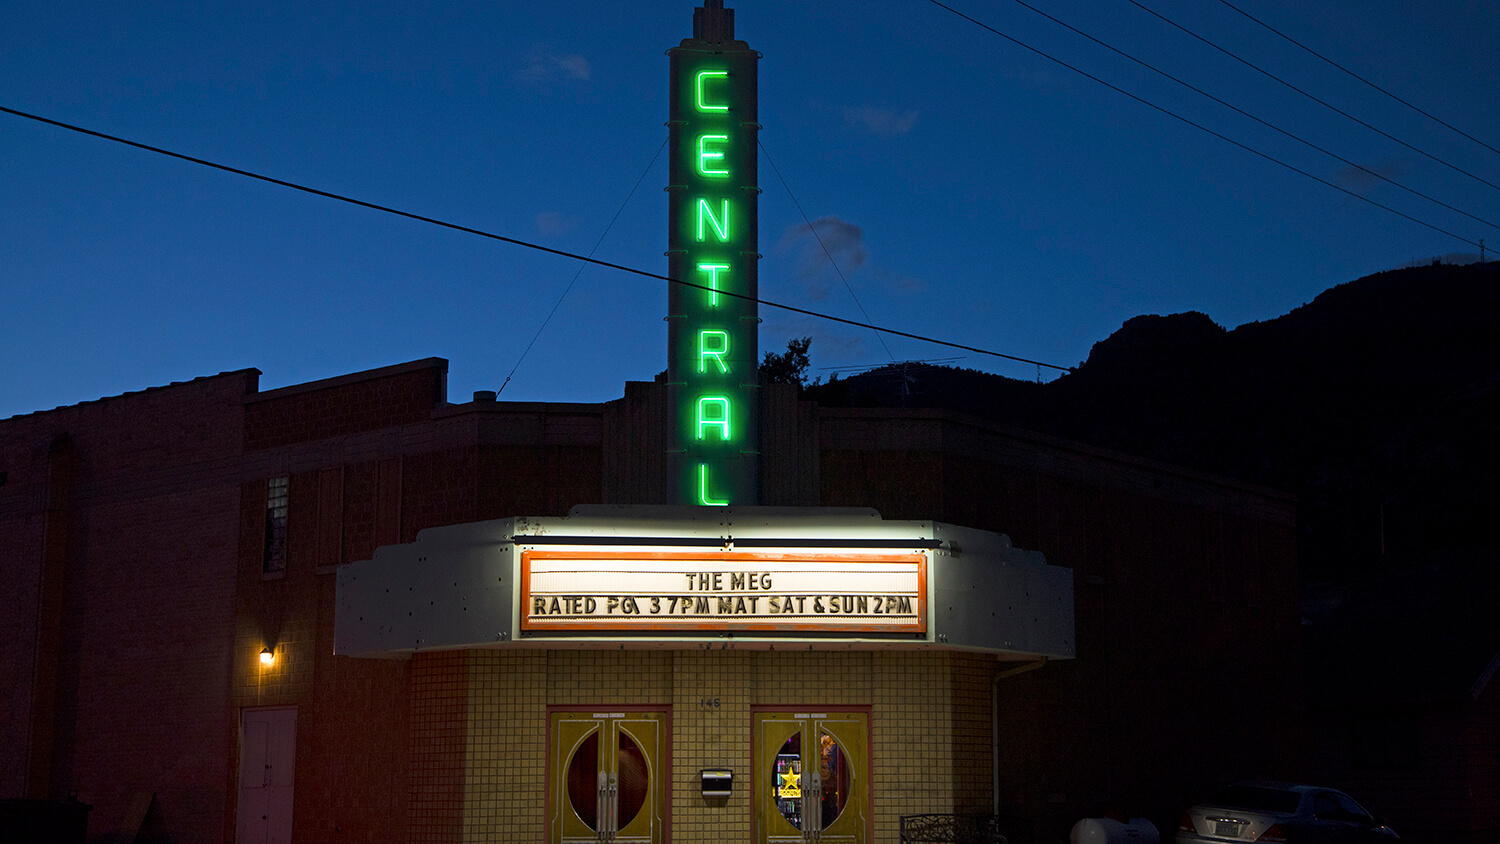 outside of the historic central theater at night